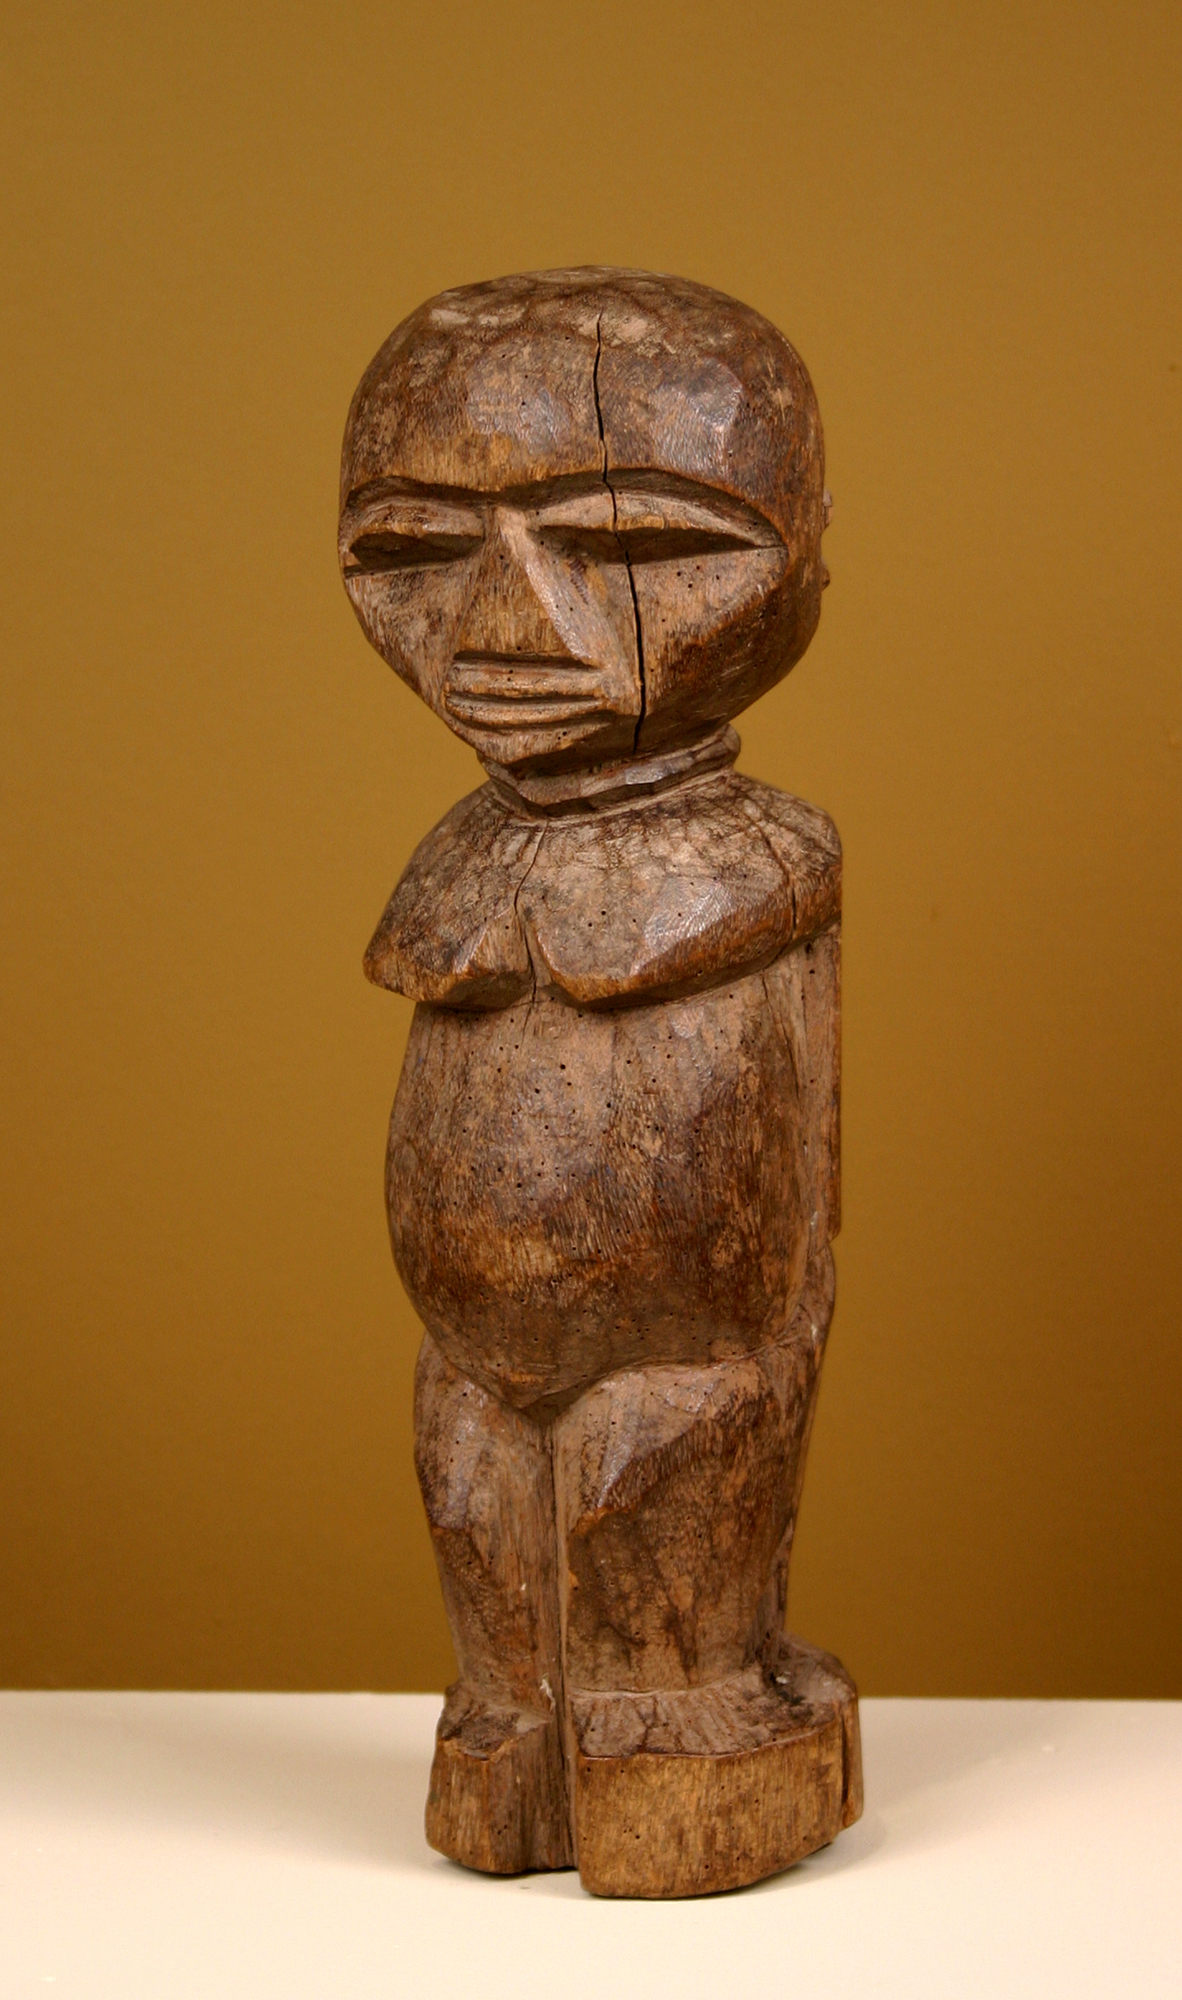 Artist Unknown (Lobi, Burkina Faso or Ivory Coast), Untitled, n.d. Wood. Collection of DePaul University, gift of the May Weber Foundation.